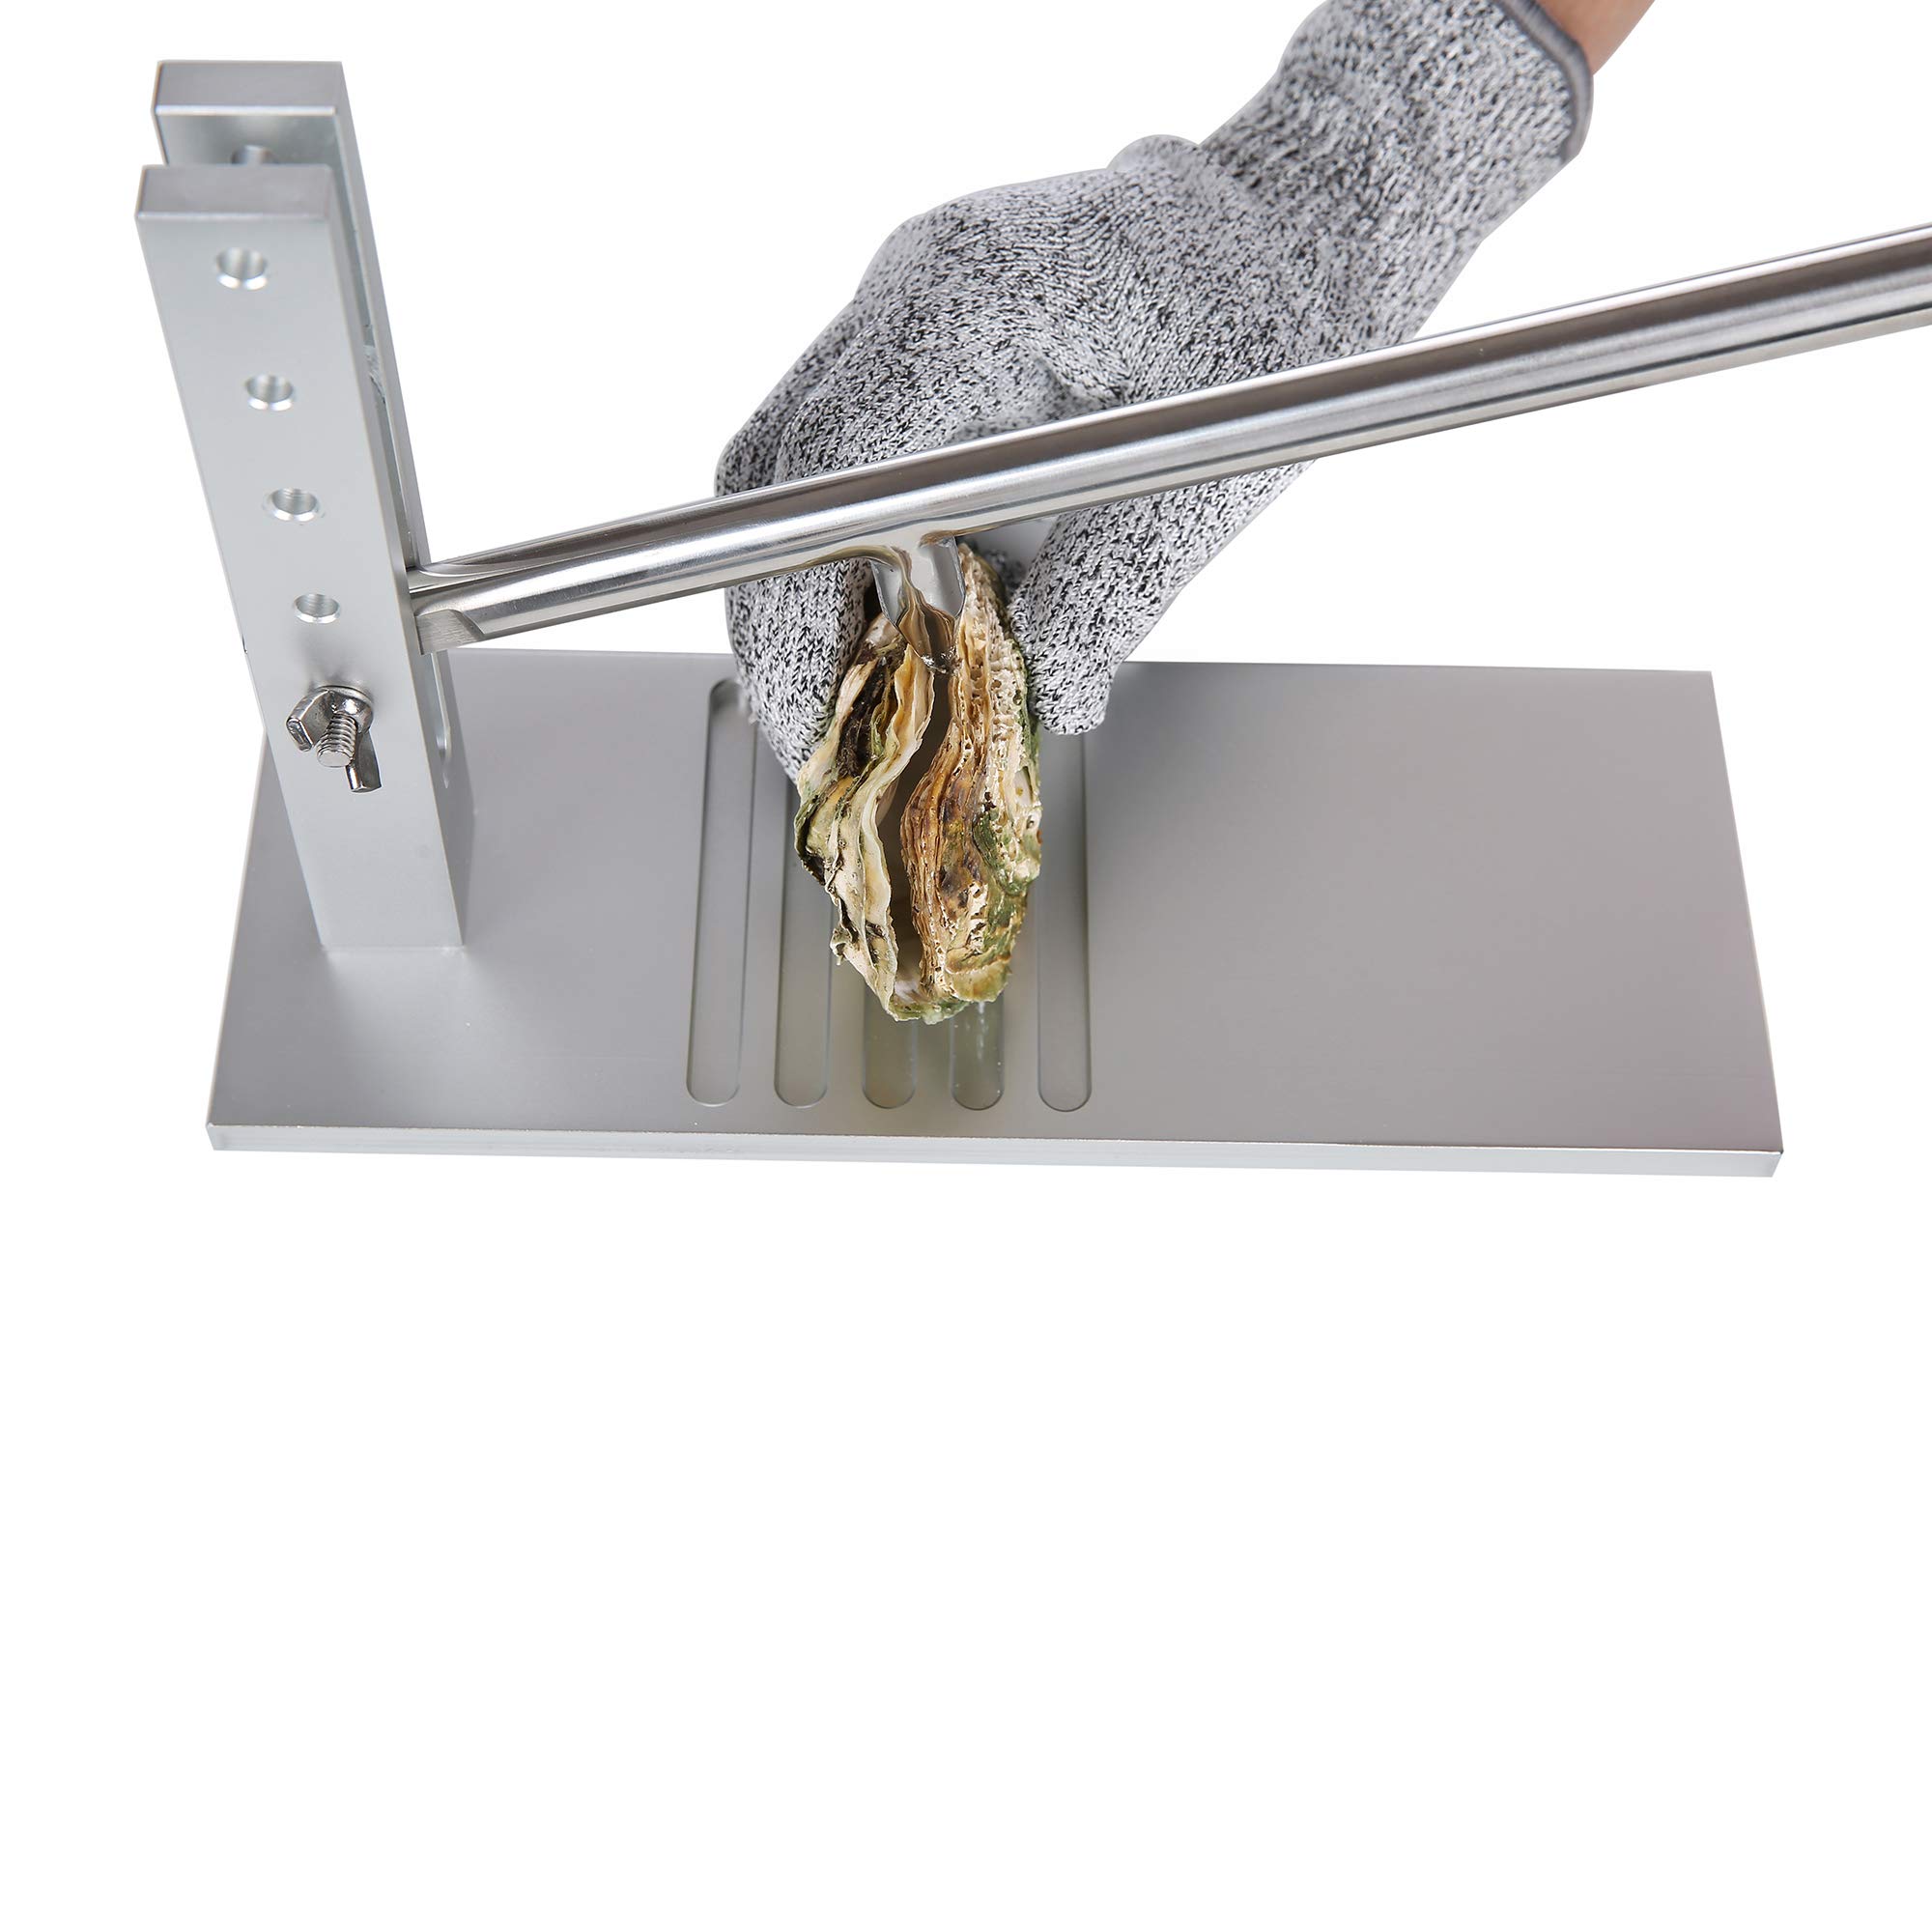 TDOCK Oyster Shucker Tool Set, Oyster Clam Opener Machine